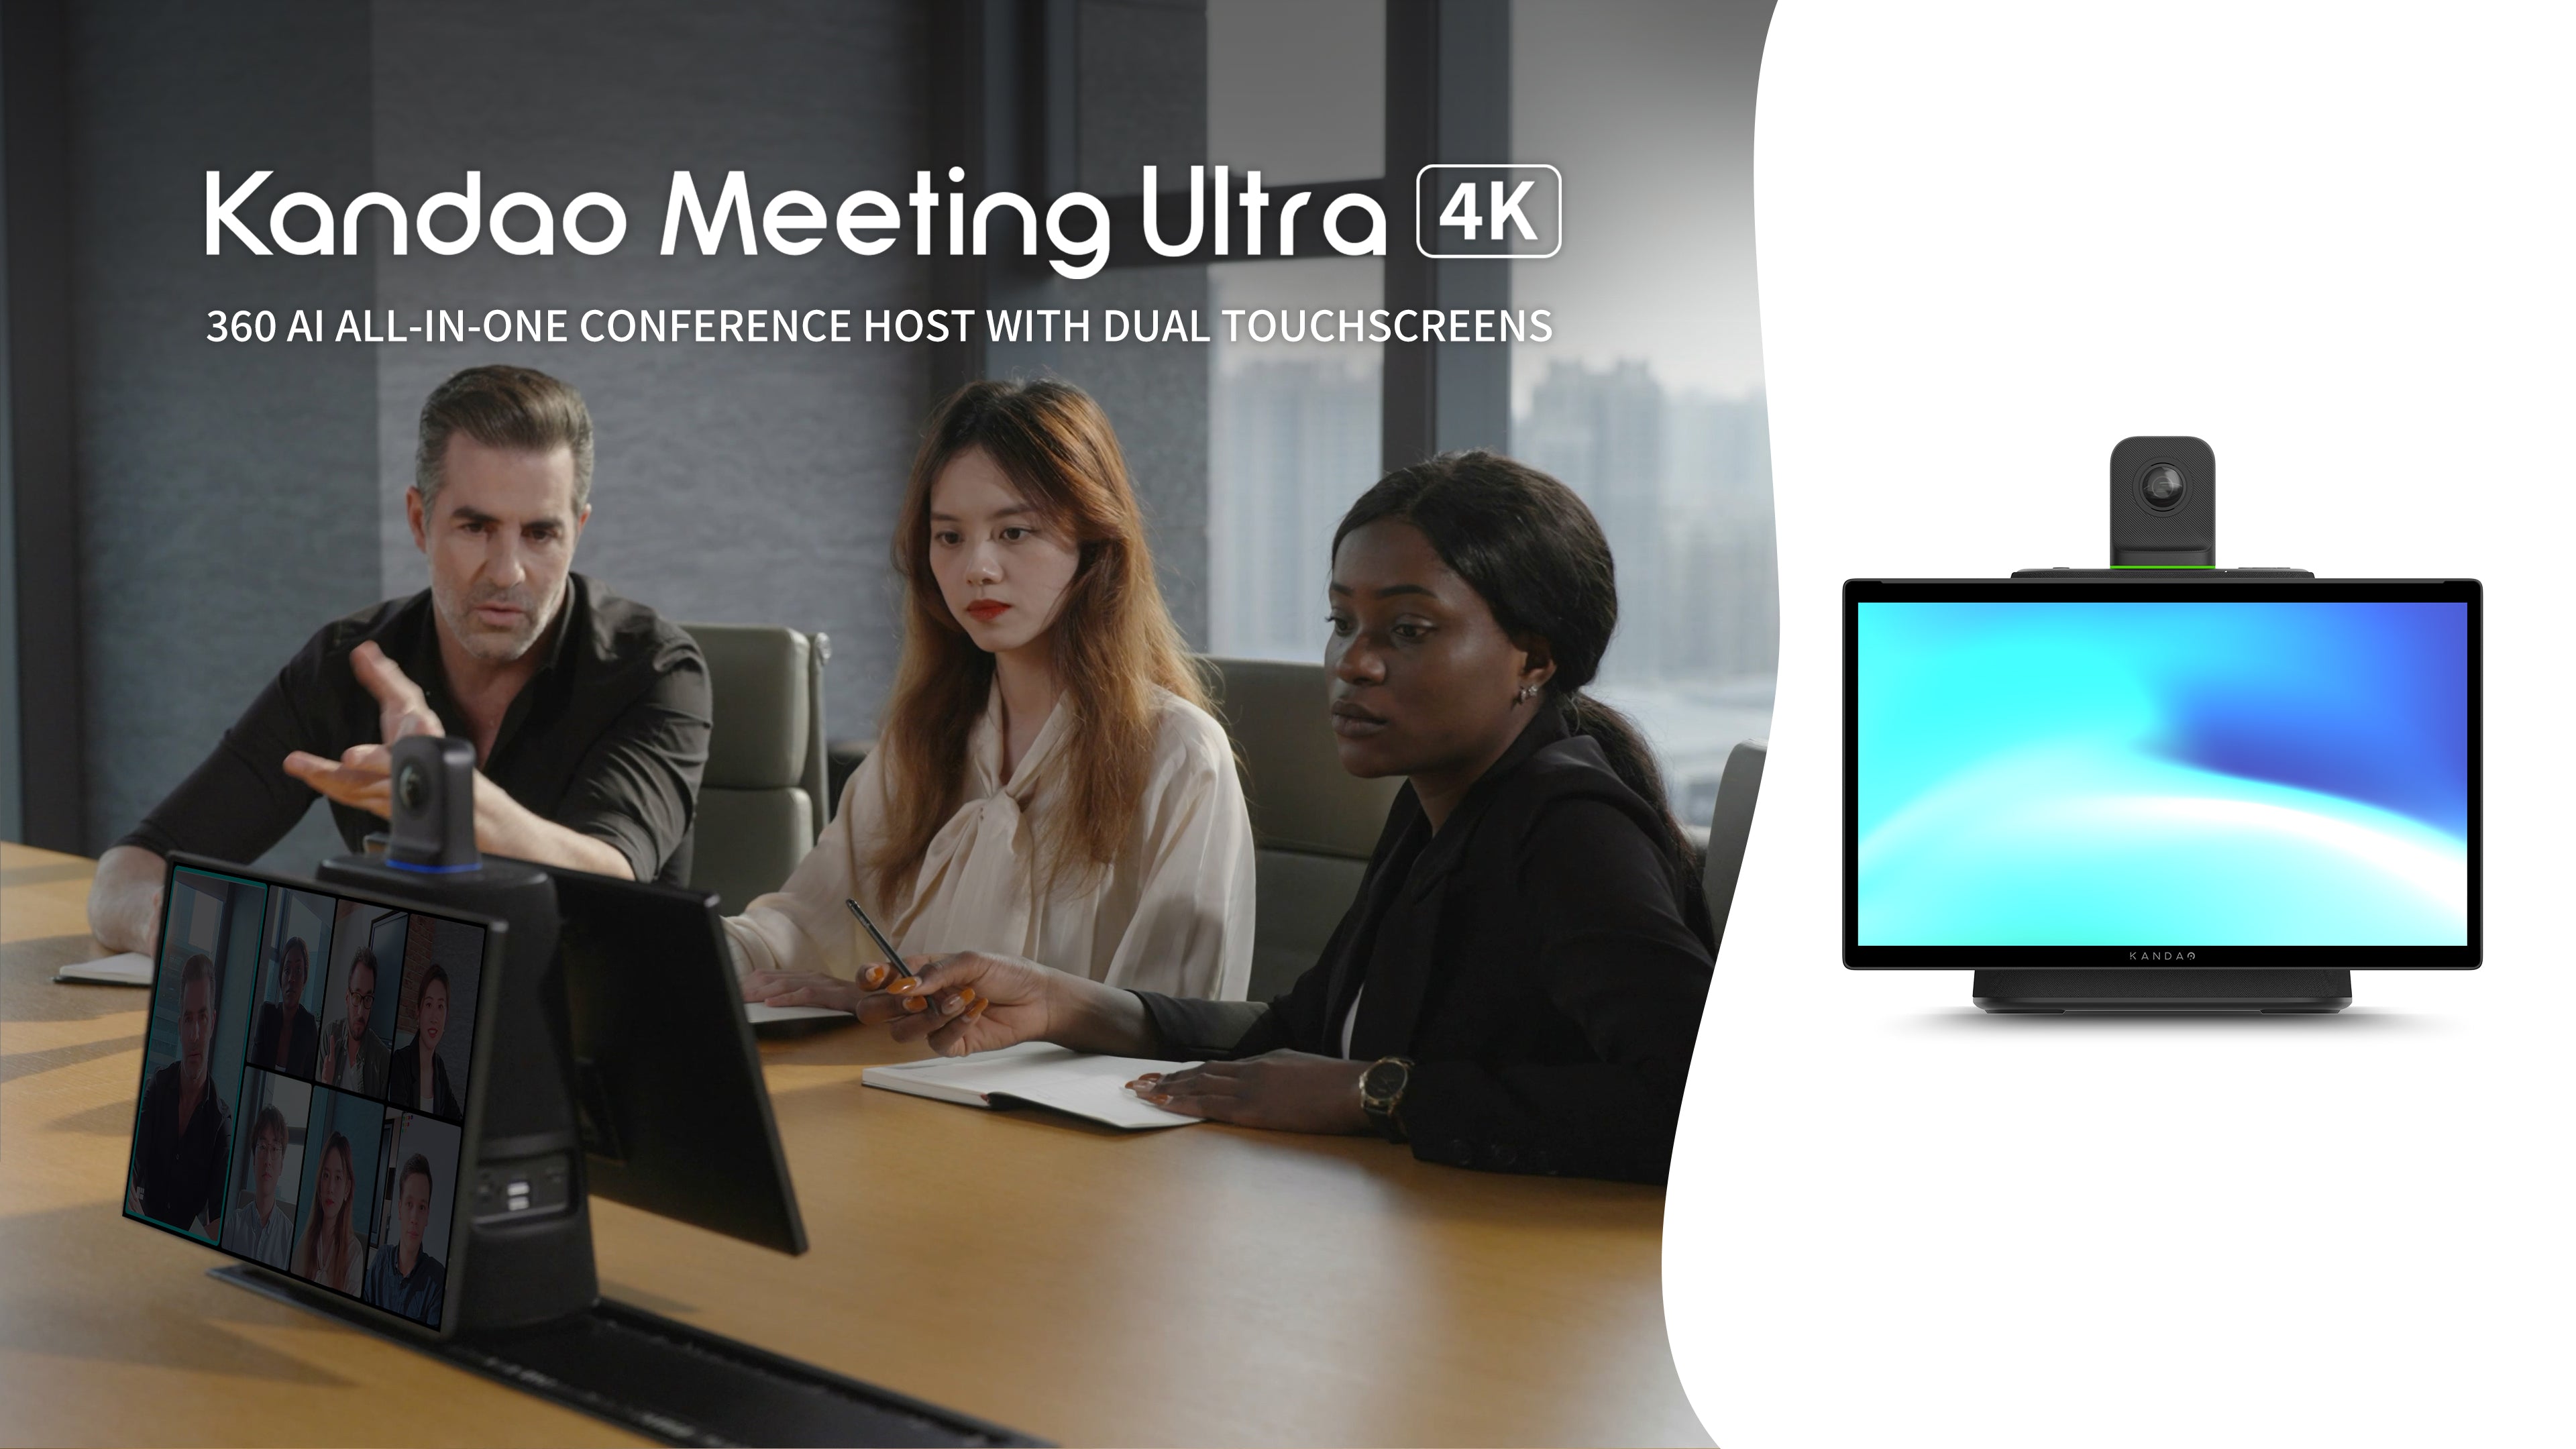 The Kandao Meeting Ultra is a first-of-its-kind, all-in-one AI conference device with dual FHD touchscreen, delivering an ultimate solution for inclusive hybrid meetings. 